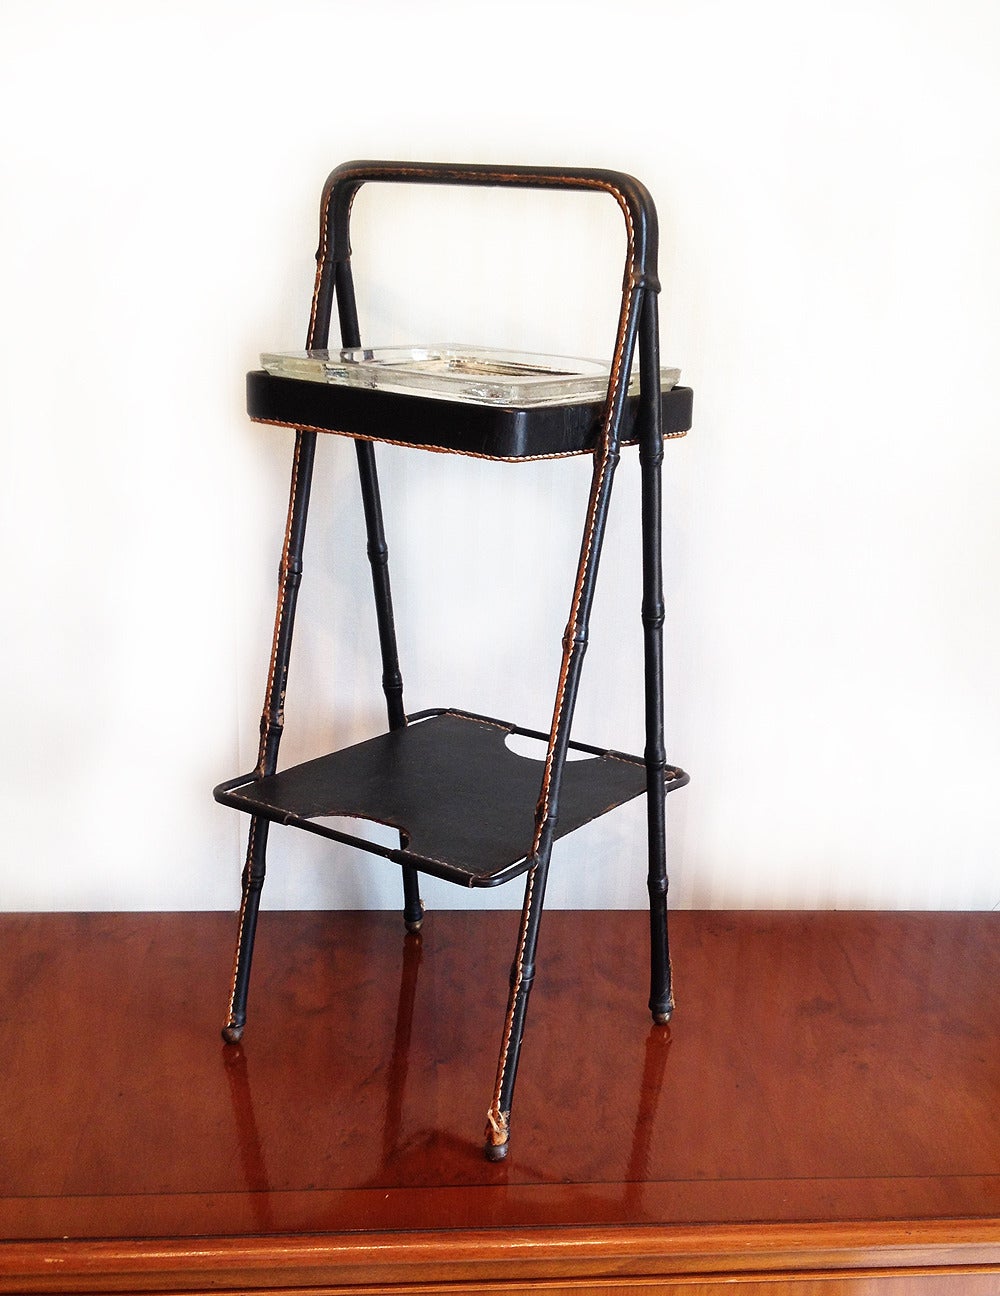 Beautiful smoking stand with stitched black leather frame terminated with four brass balls.
The glass ashtray or dish is in excellent condition.
Dimensions: H 23